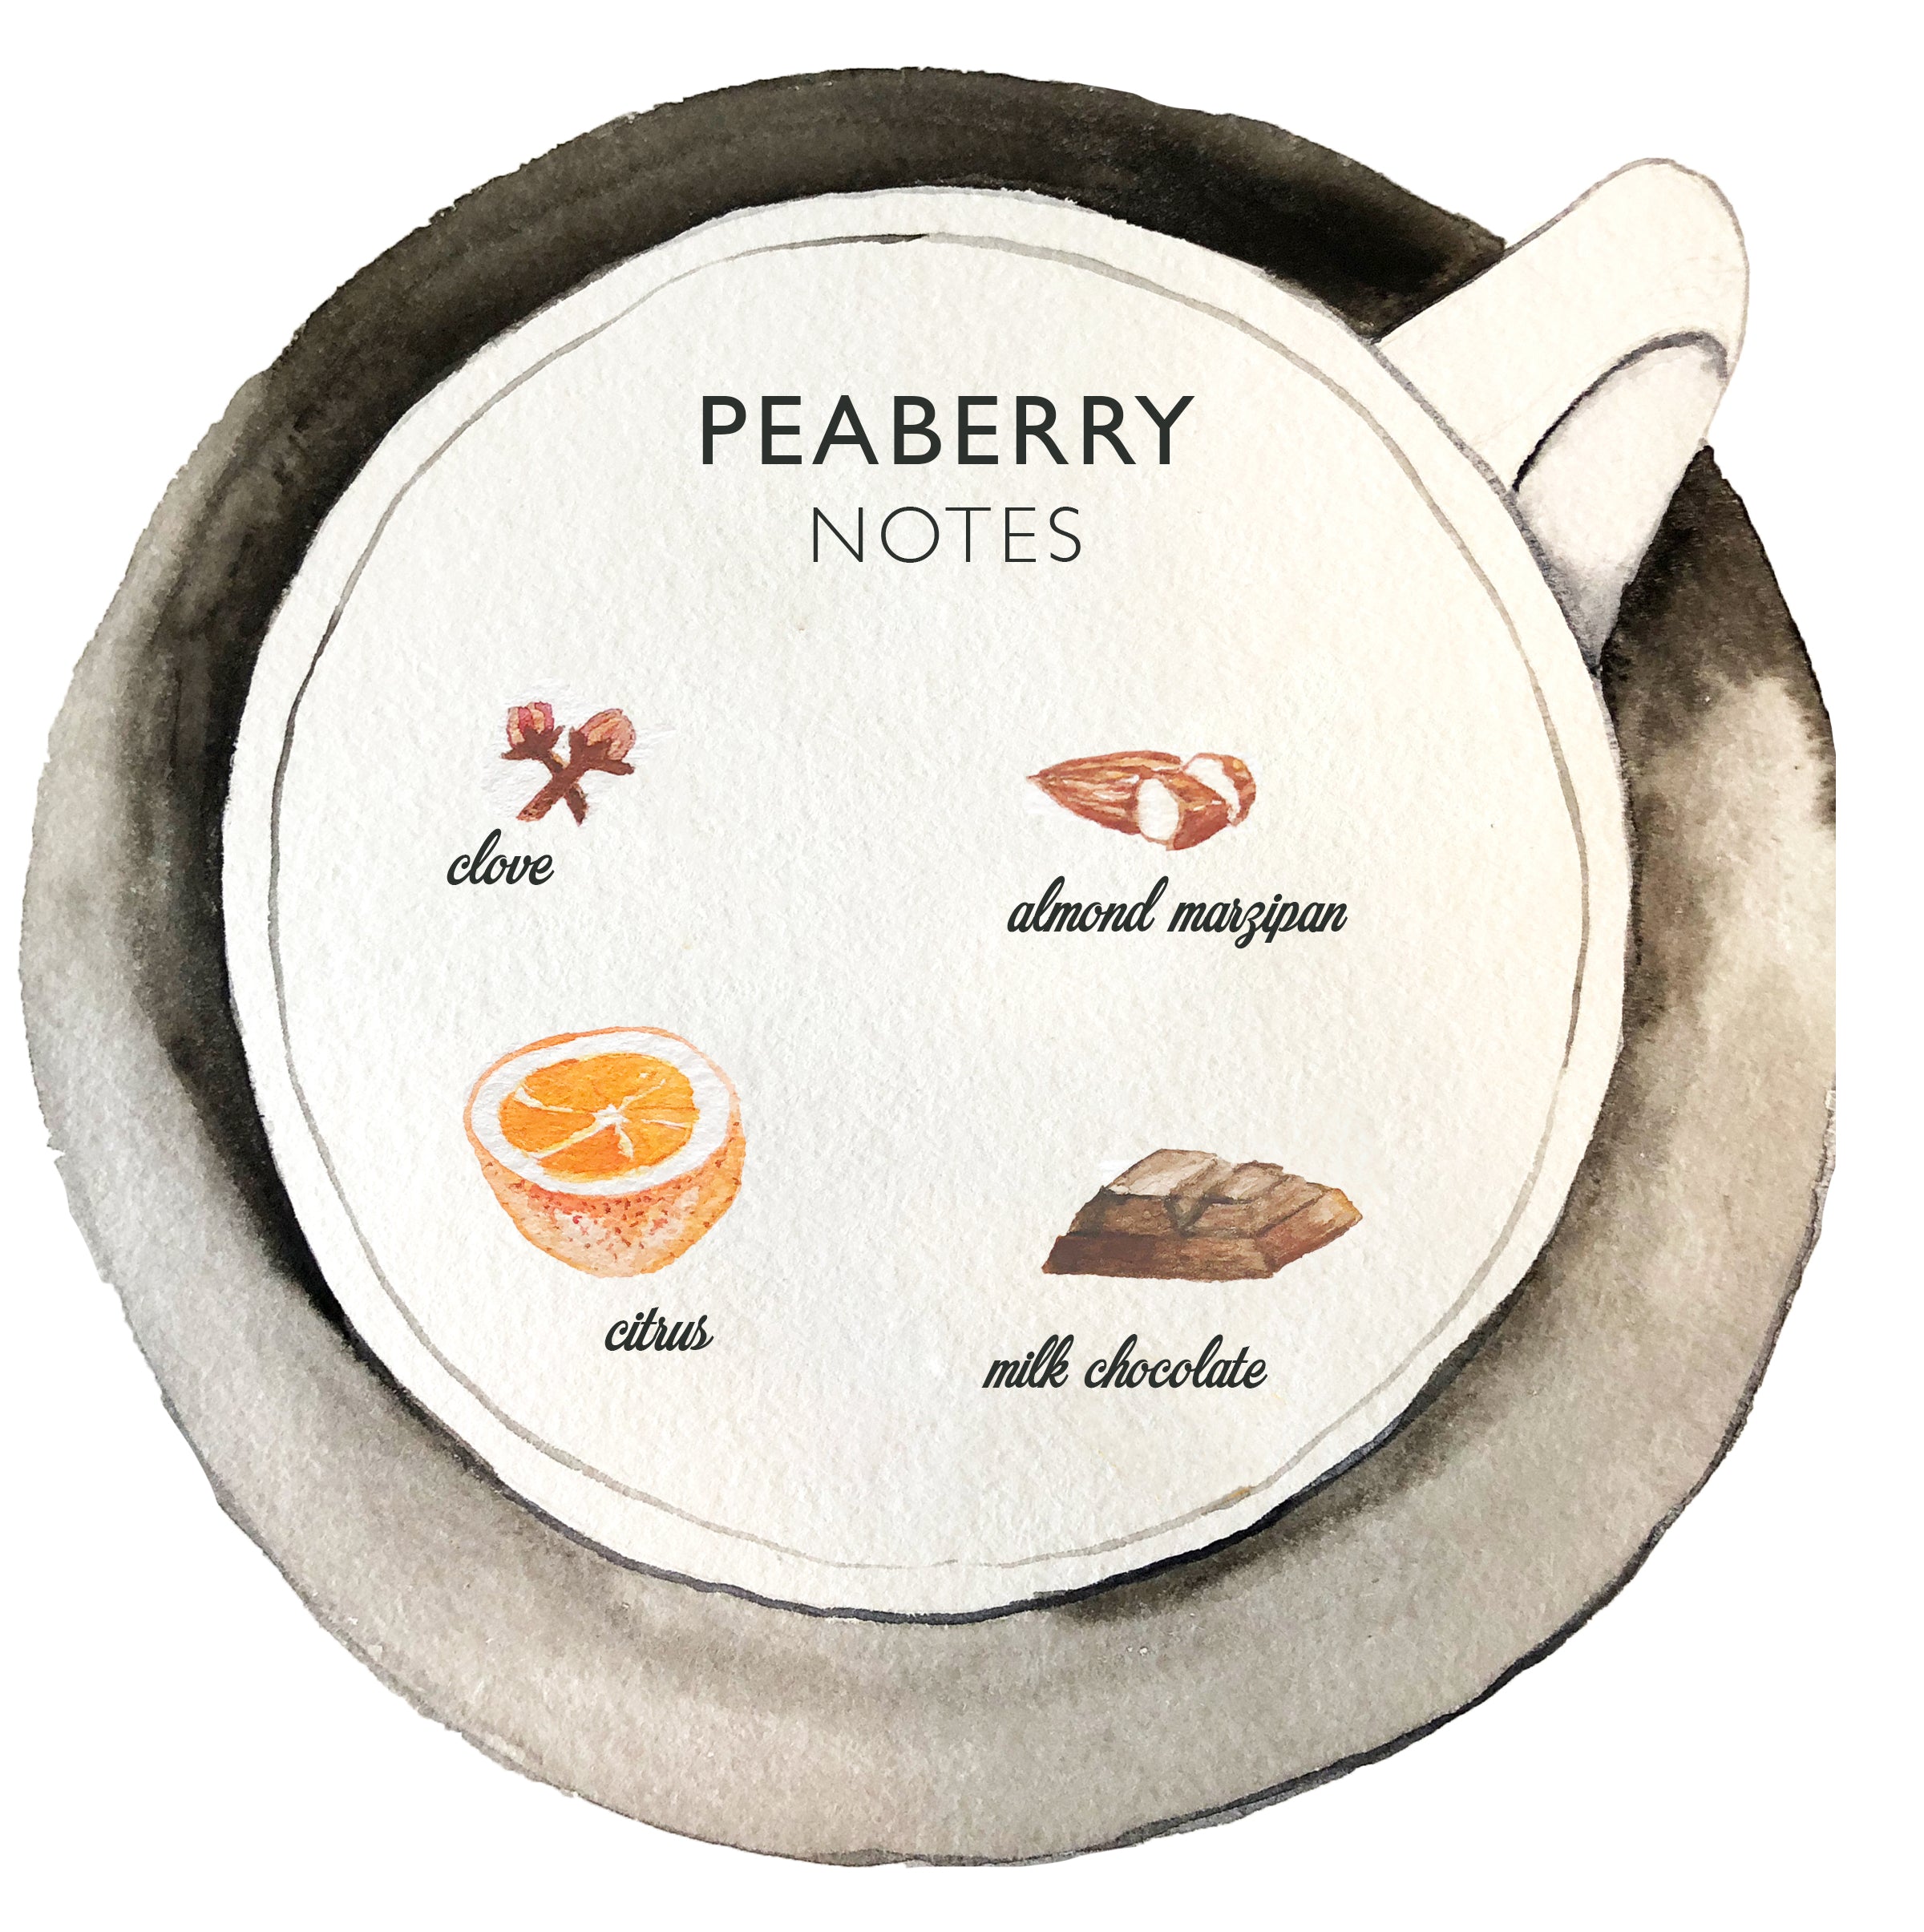 Peaberry notes KCTC watercolor.jpg